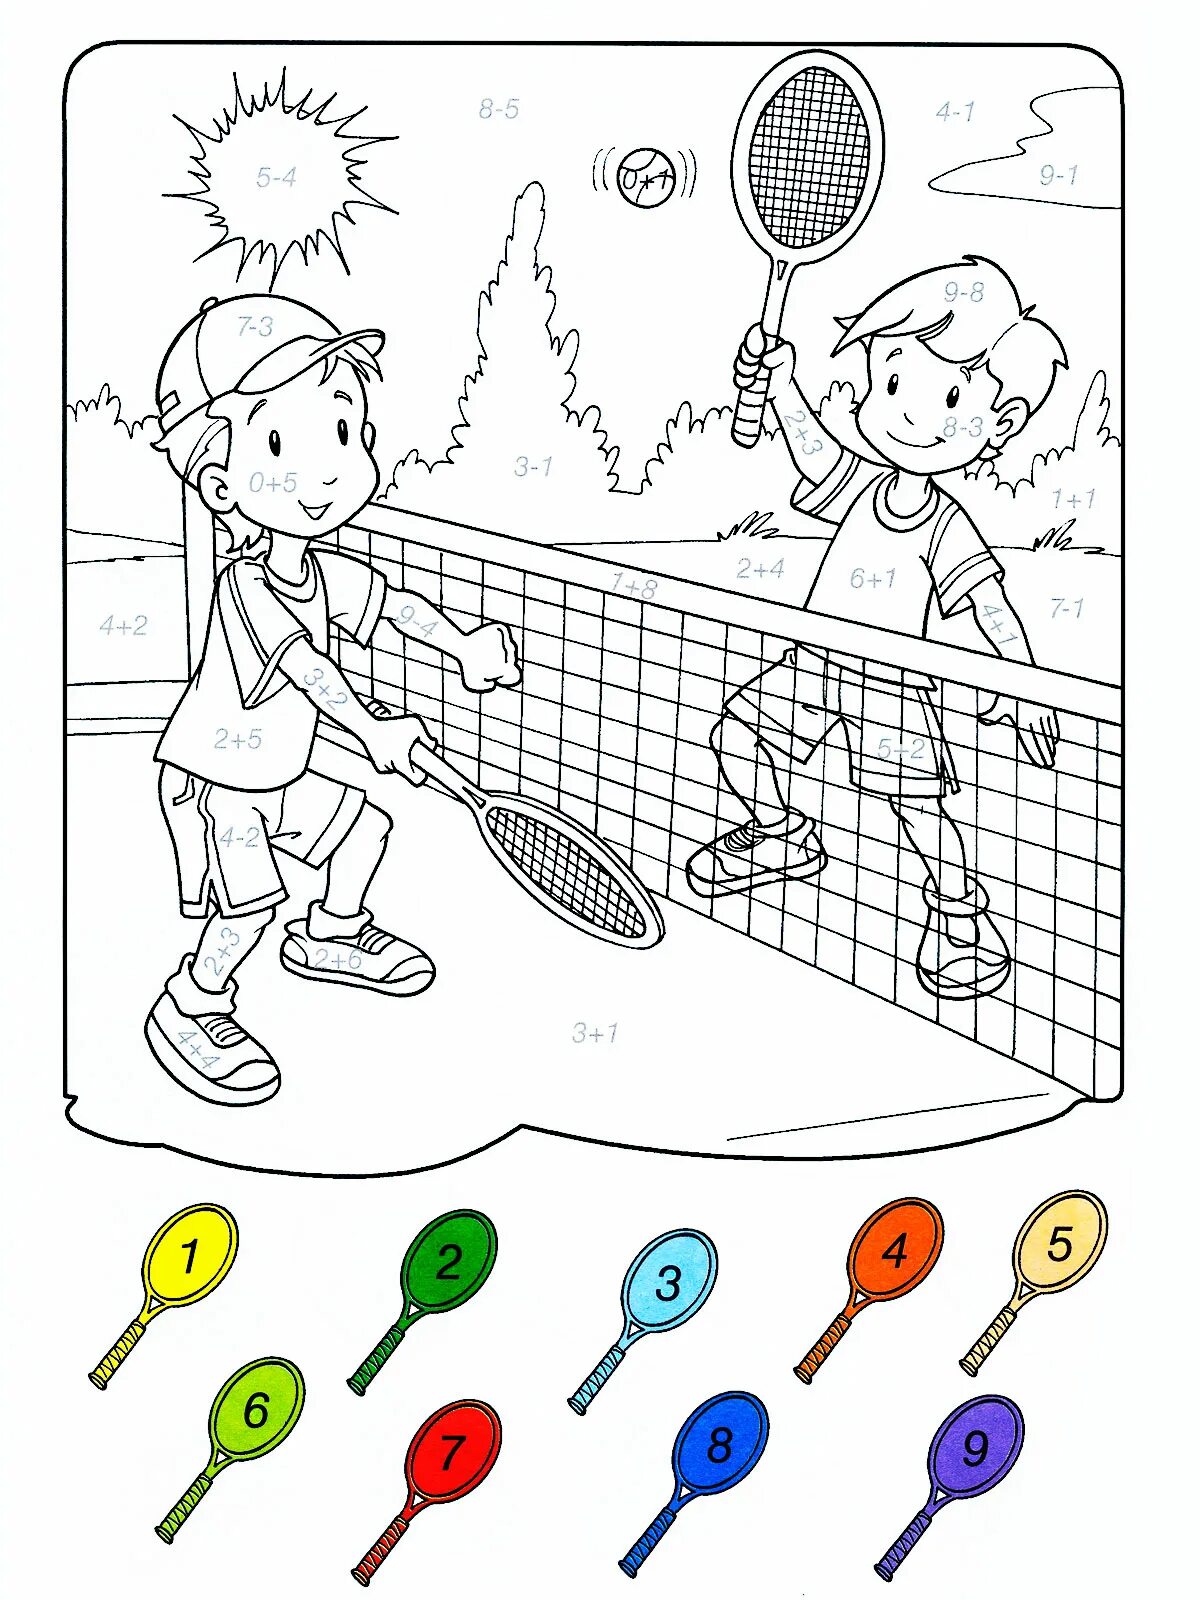 Fancy sports coloring pages for preschoolers